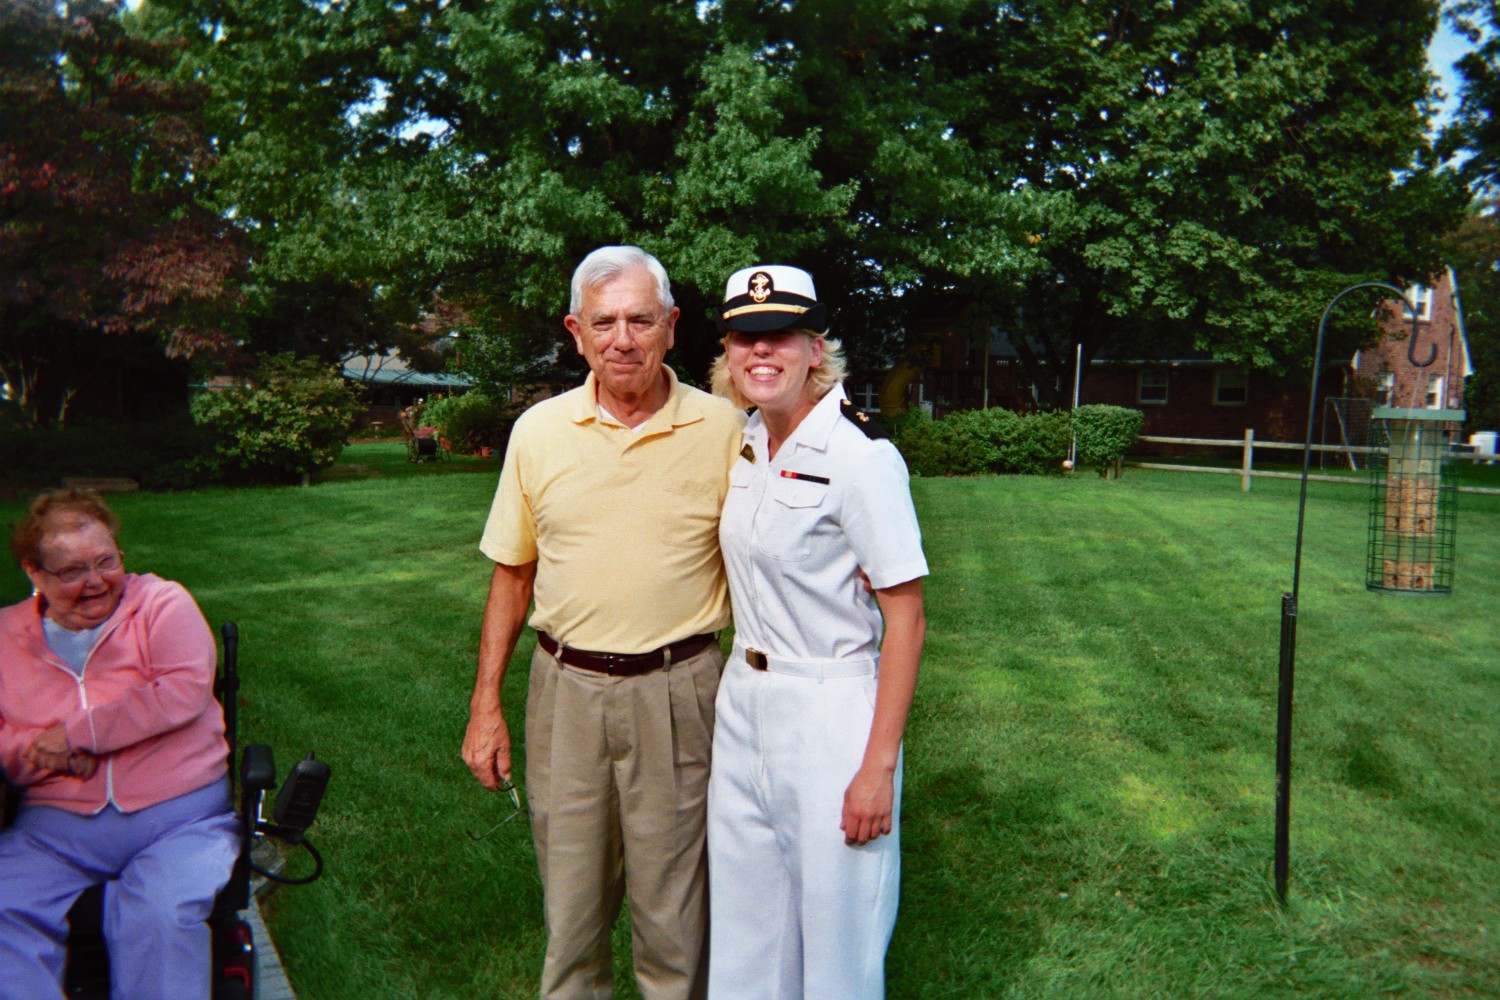 Col. Stumpf and Naval "10 Felicia
